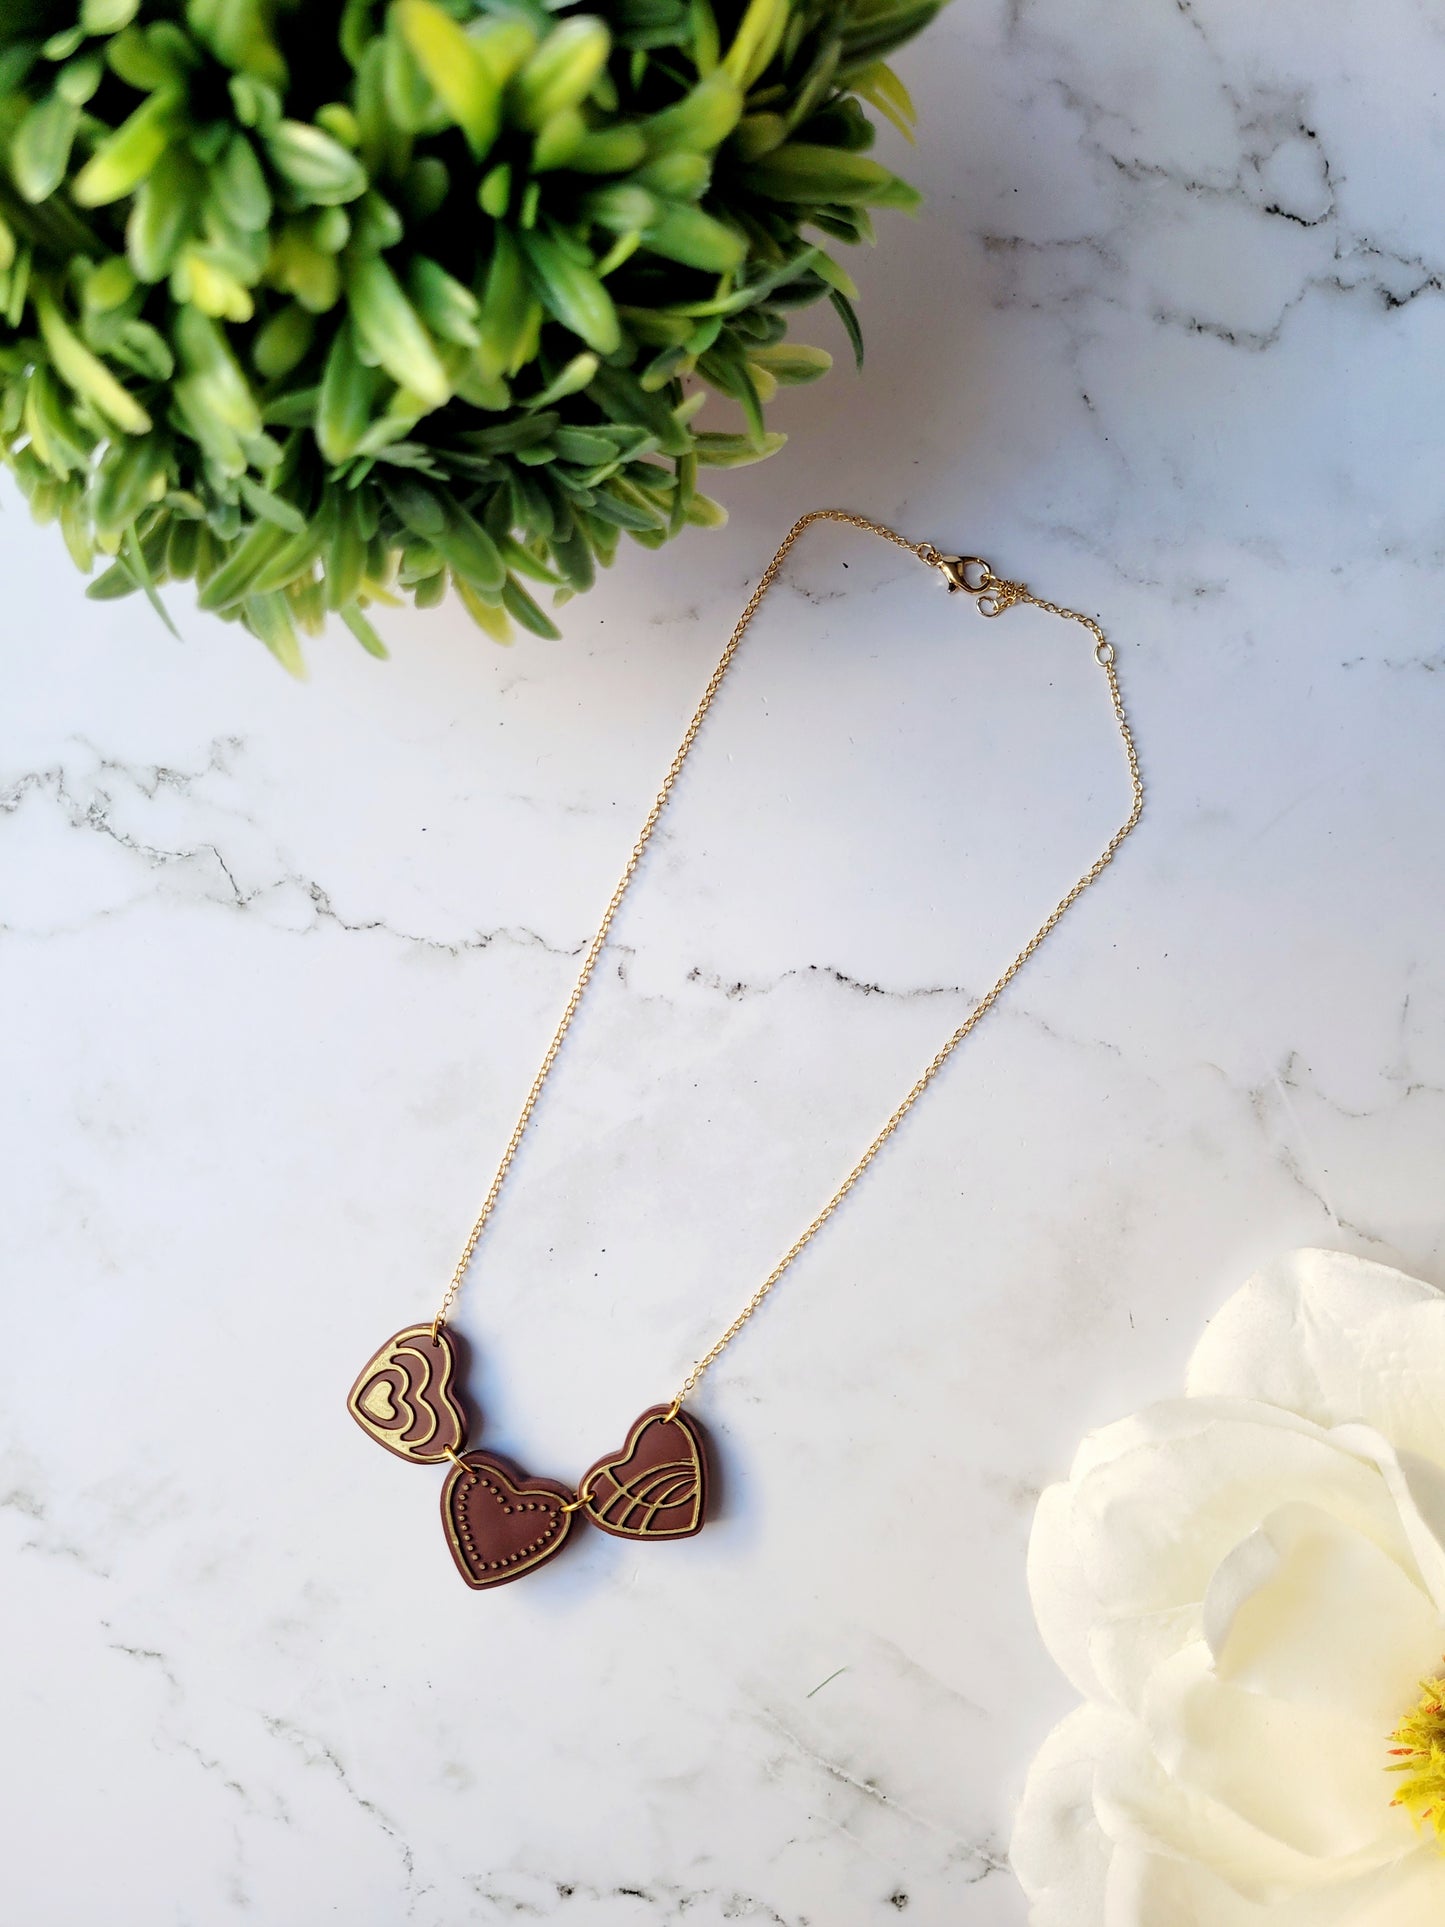 Chocolate and gold heart truffle necklace on a white background.